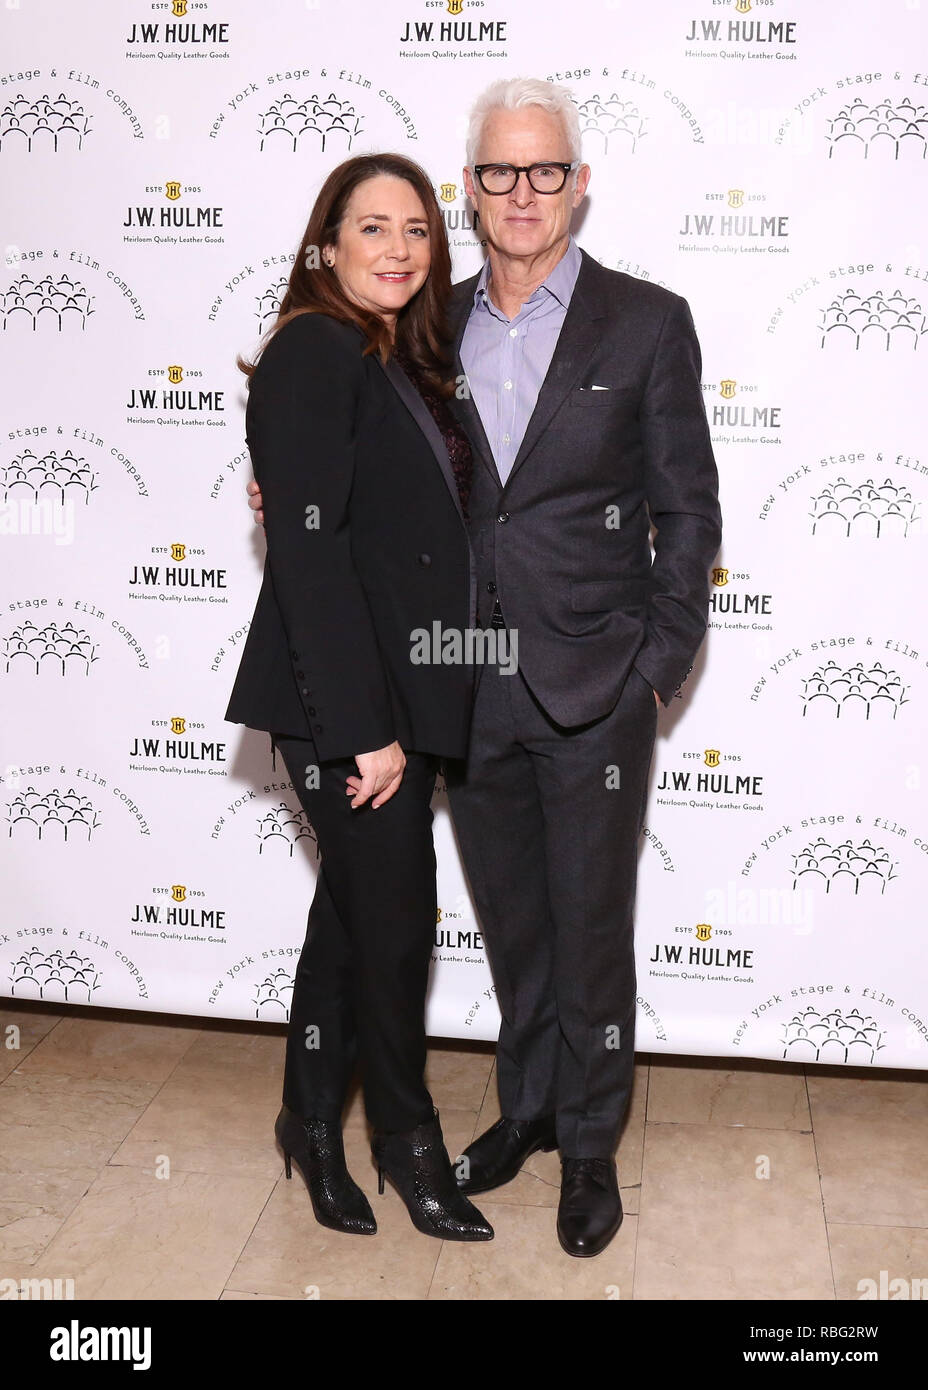 2018 New York Stage and Film Winter Gala held at the Plaza Hotel - Arrivals.  Featuring: Talia Balsam, John Slattery Where: New York, New York, United States When: 09 Dec 2018 Credit: Joseph Marzullo/WENN.com Stock Photo